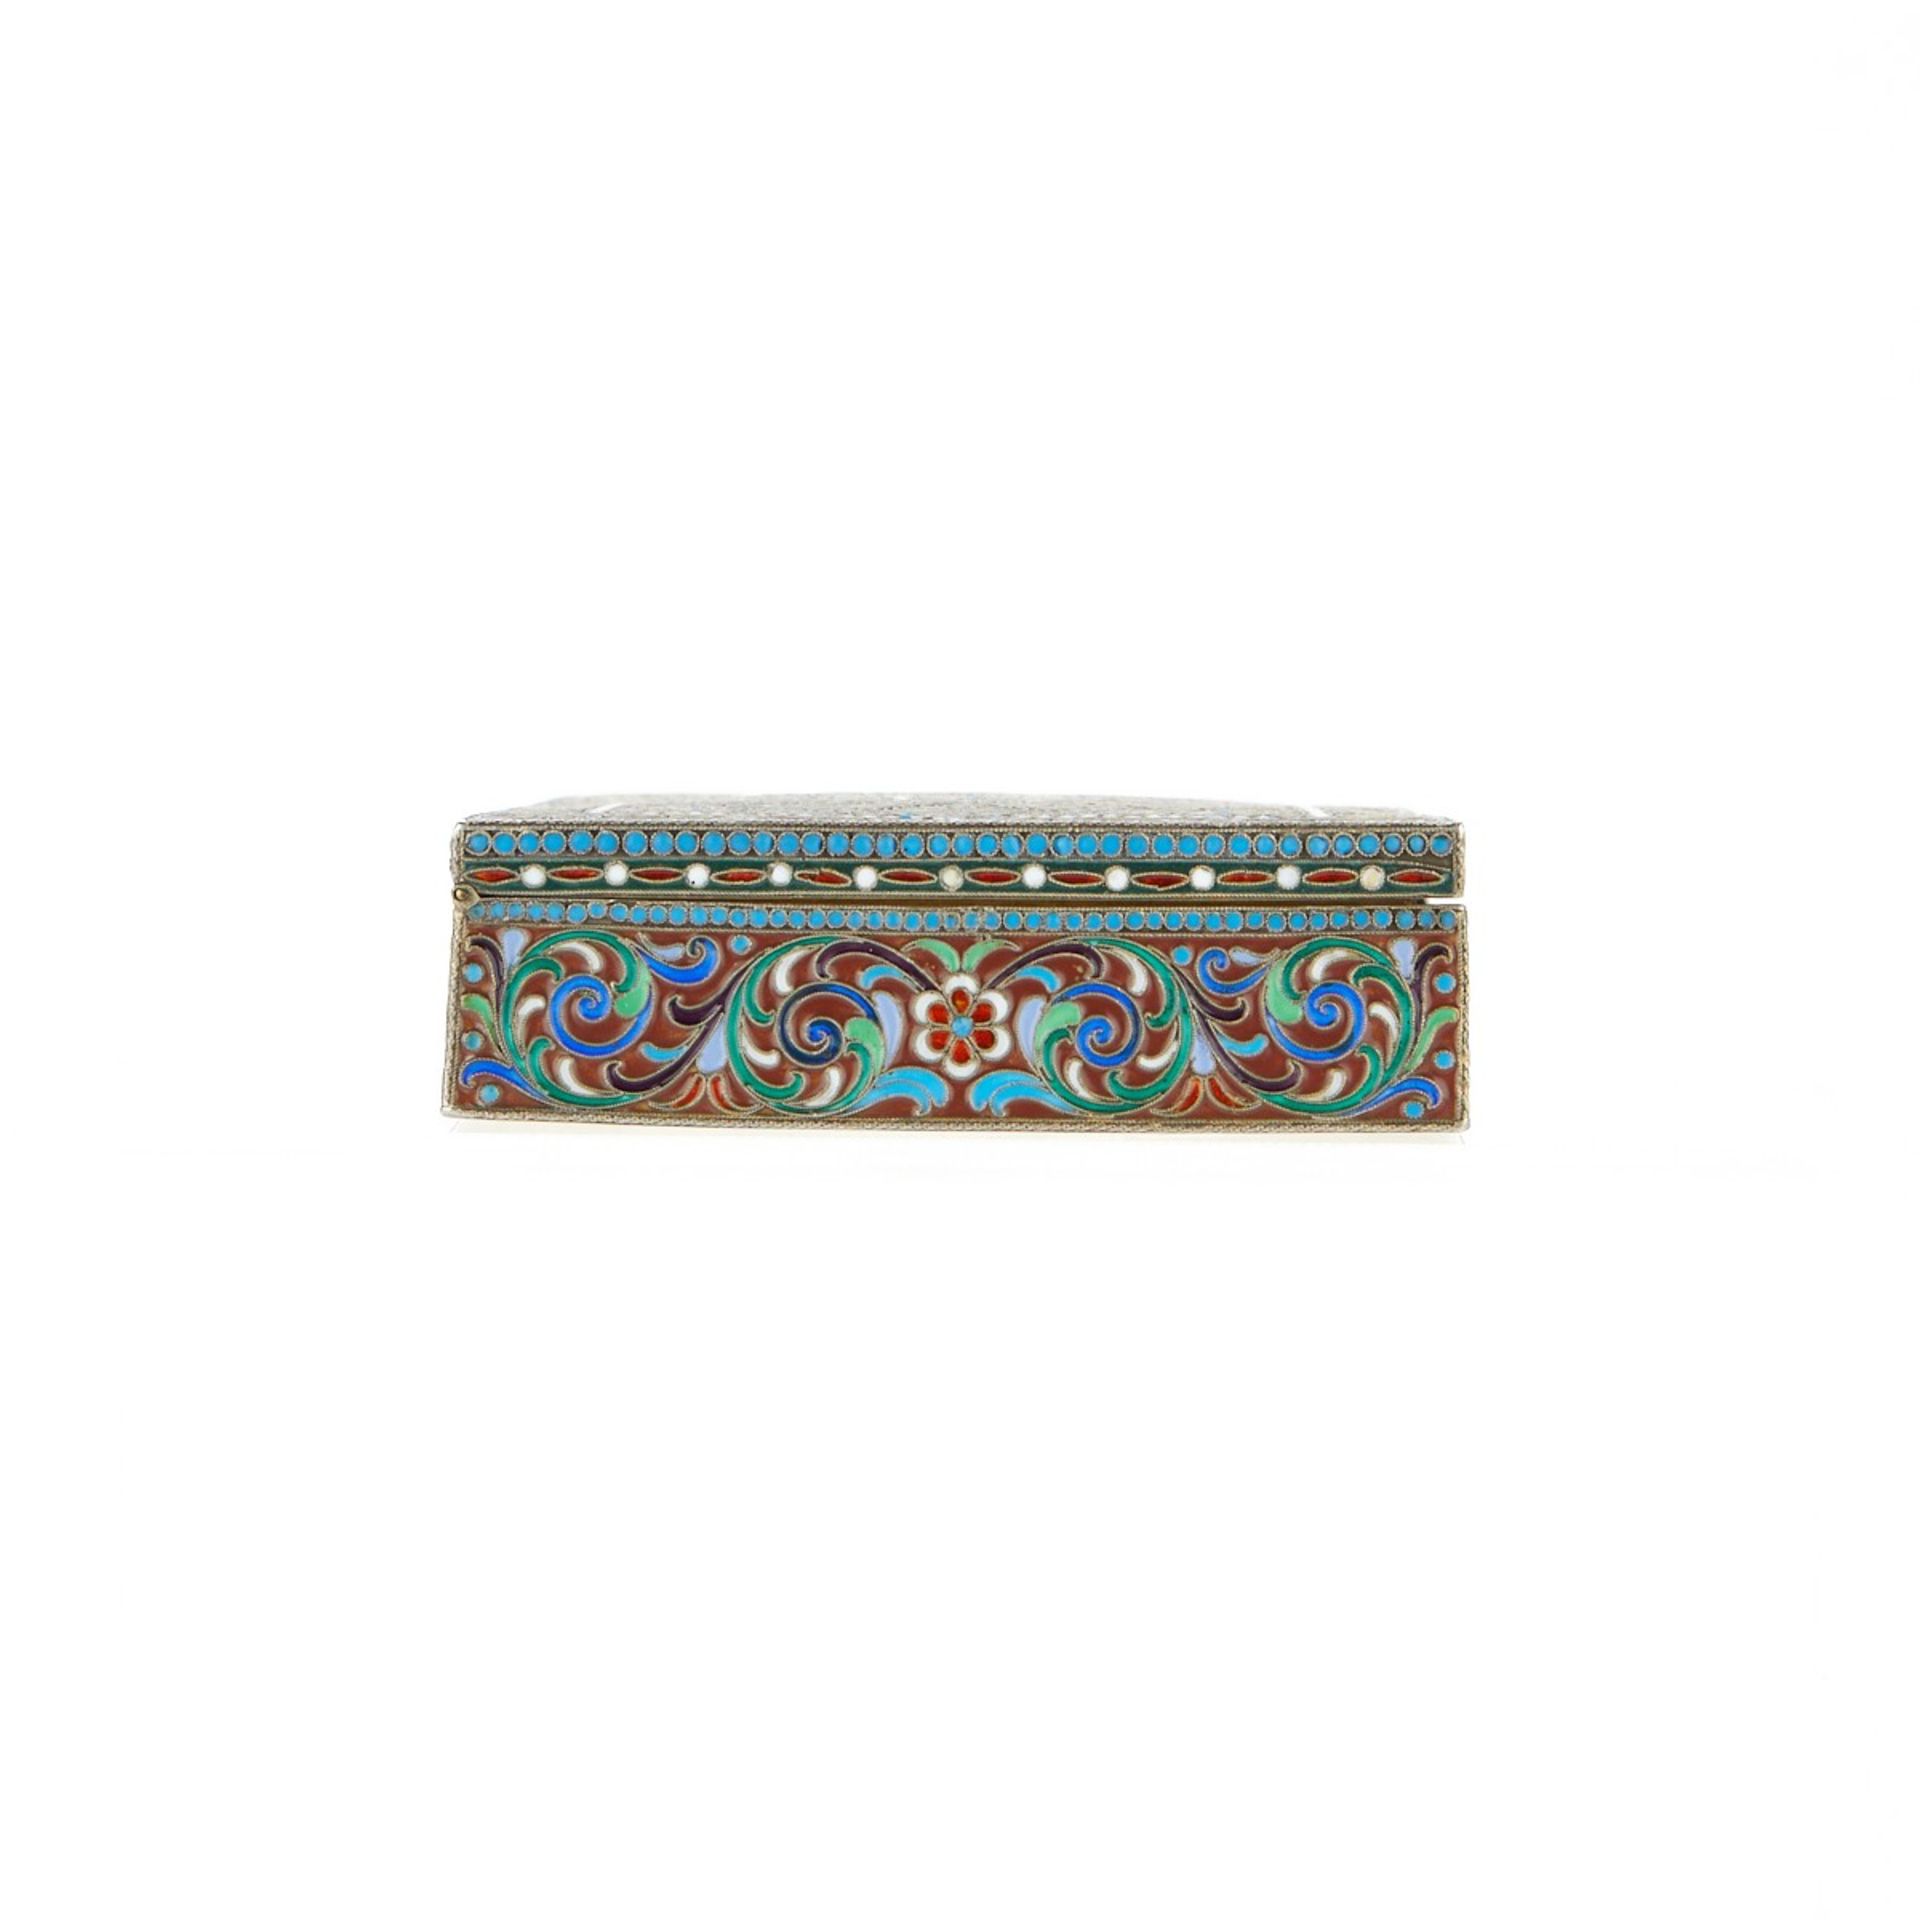 Russian Enameled Silver Tabletop Cigarette Box - Image 4 of 17